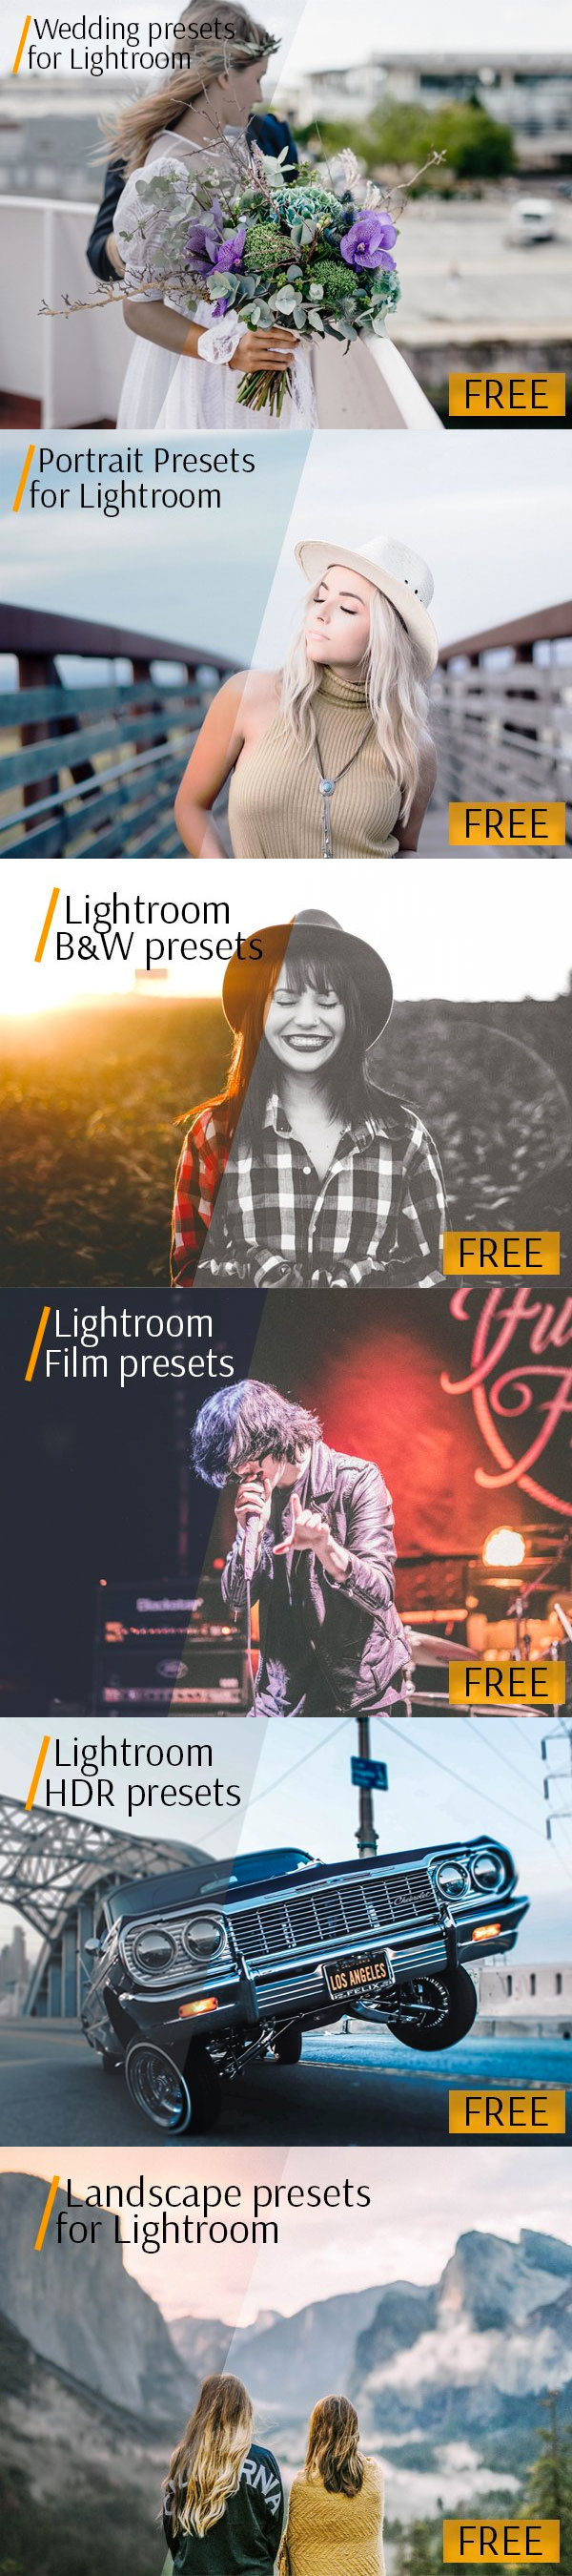 FREE professional Lightroom presets bundles for different photography styles designed by FixThePhoto service.